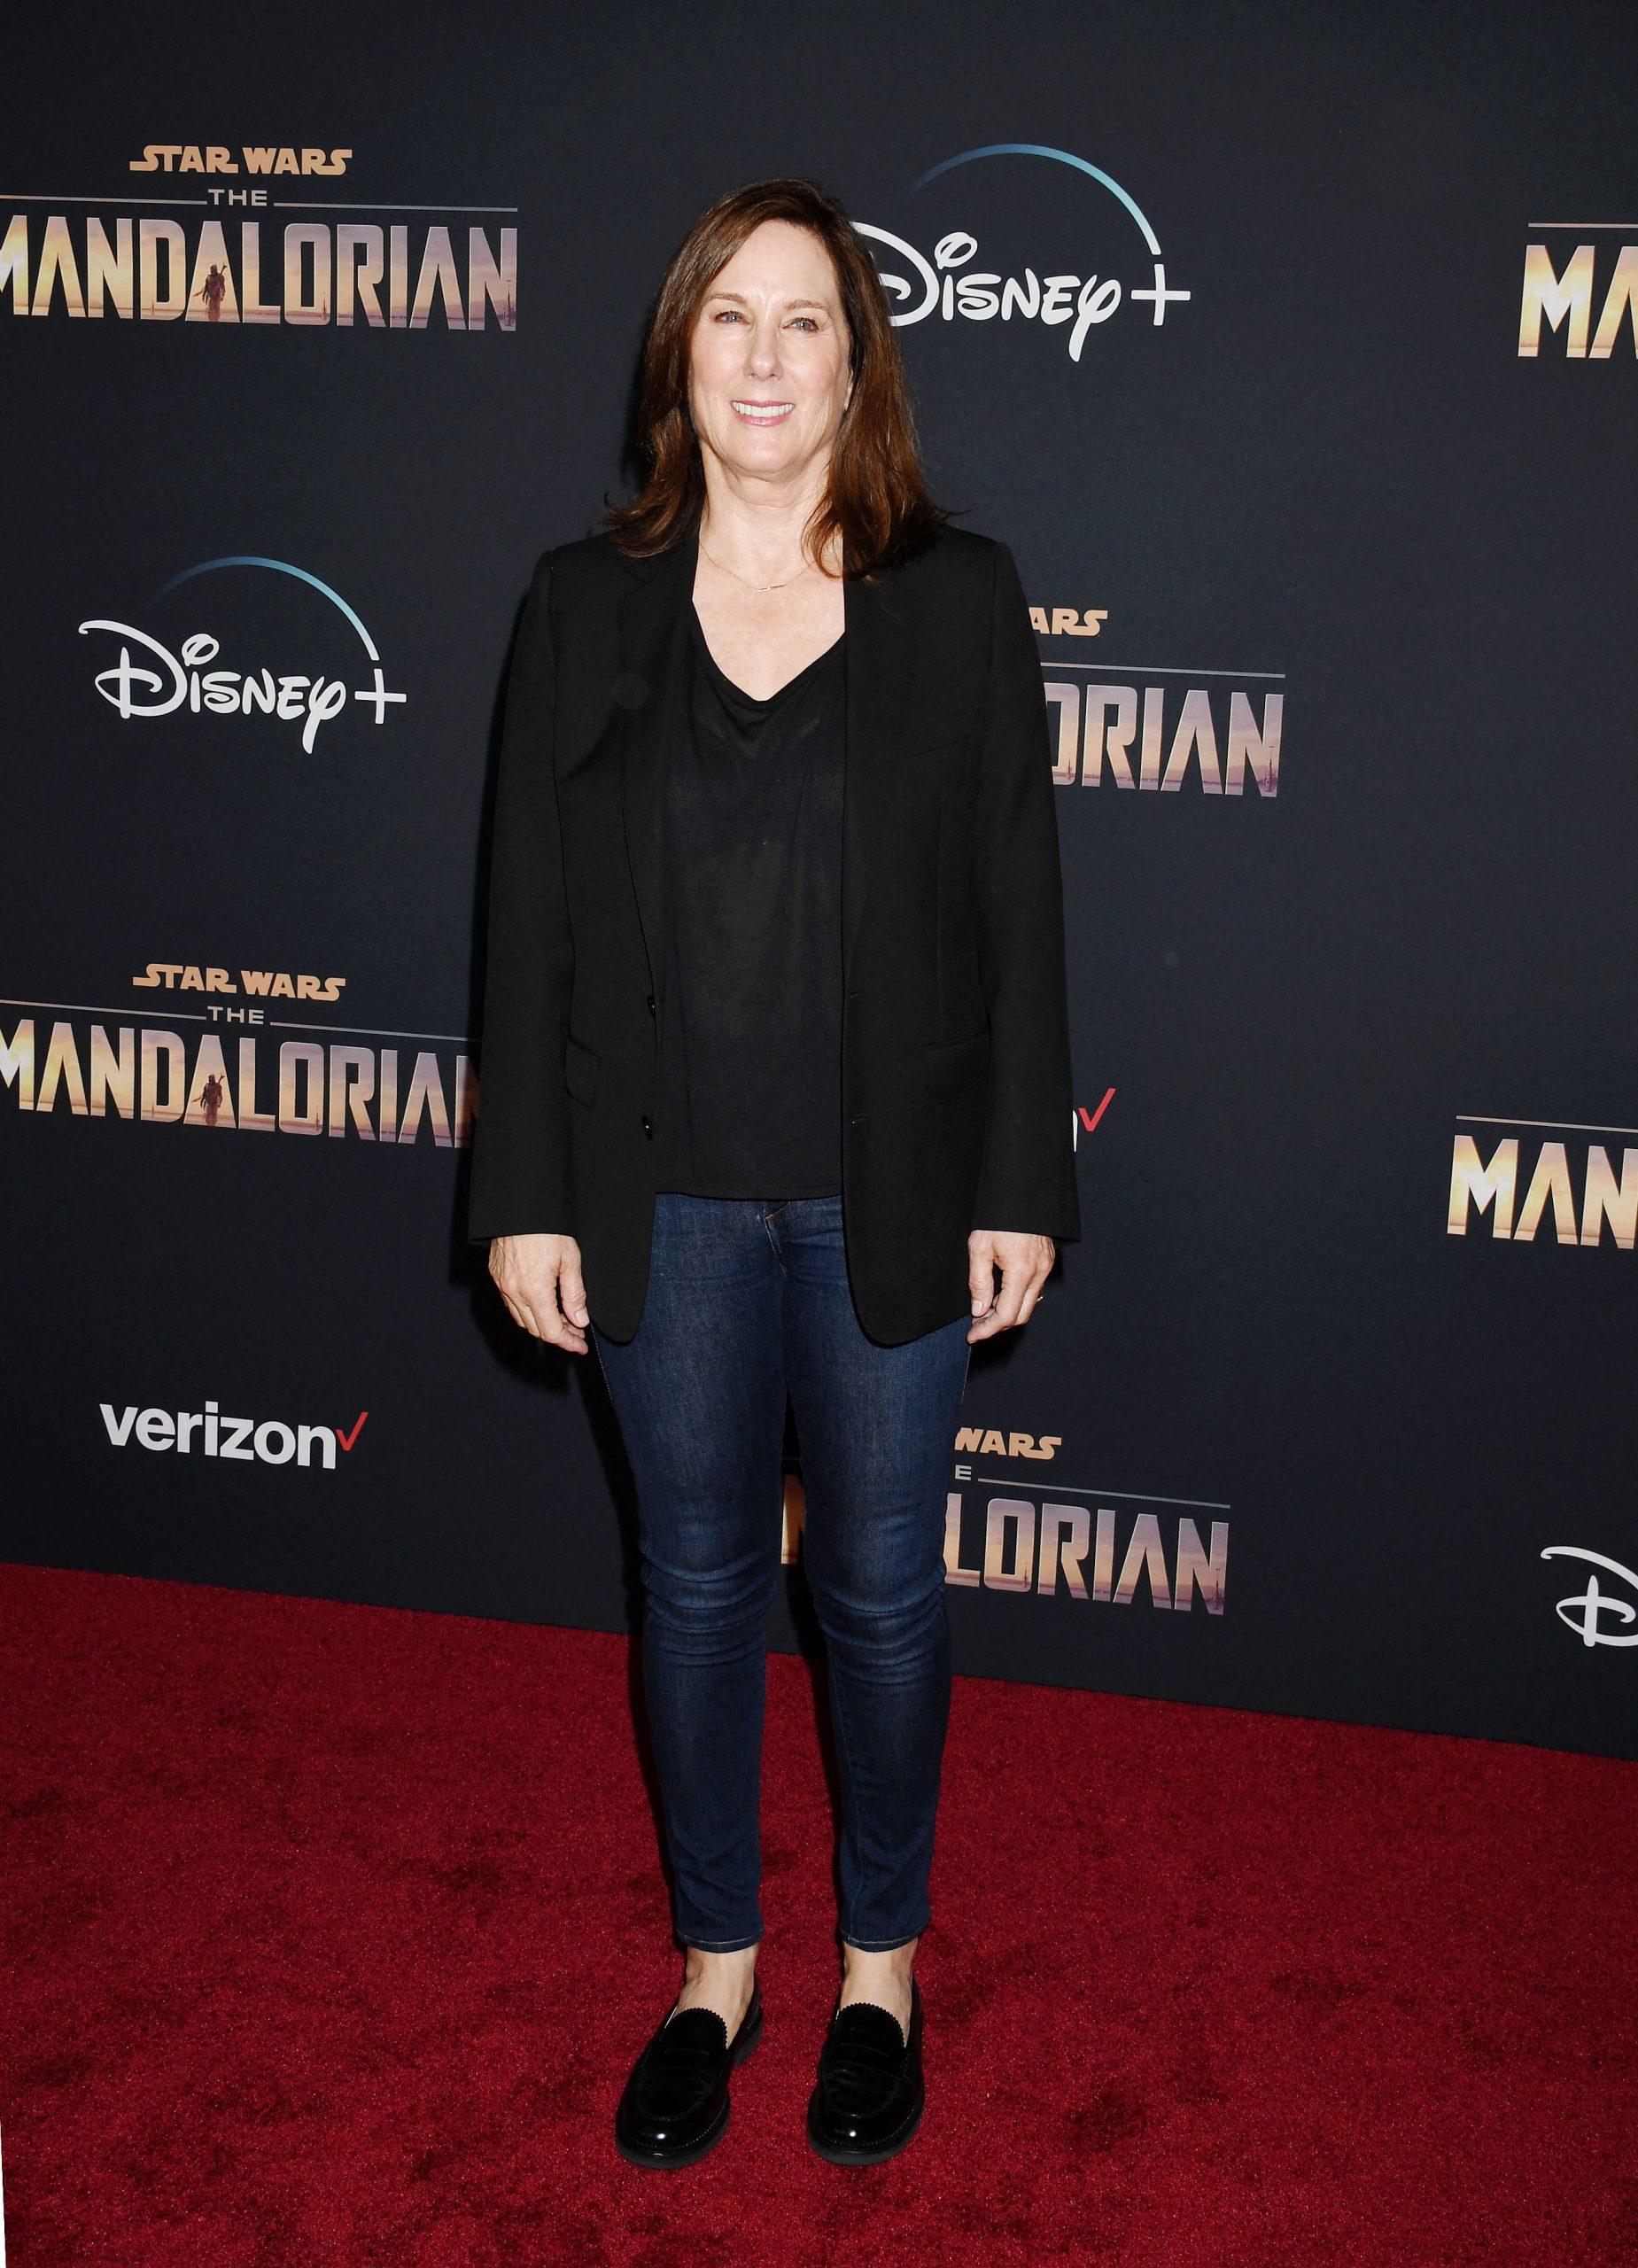 Kathleen Kennedy at the Premiere Of Disney+'s "The Mandalorian" - Arrivals